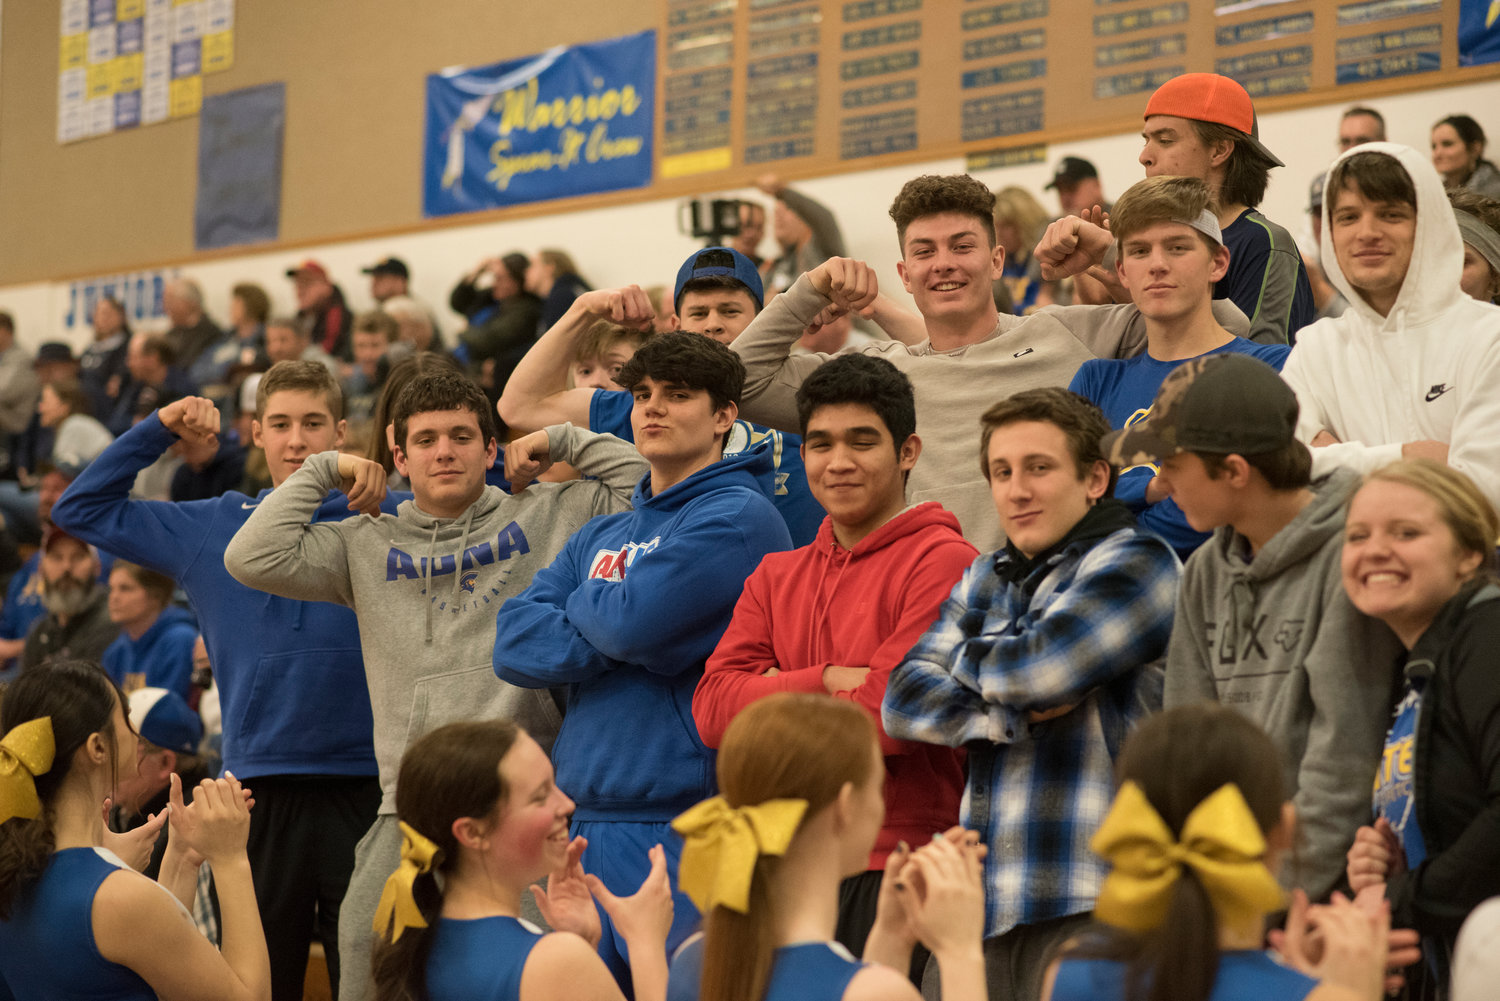 Adna students react during a timeout of the Pirates 46-33 win over Rainier Thursday. (Eric Trent / etrent@chronline.com)